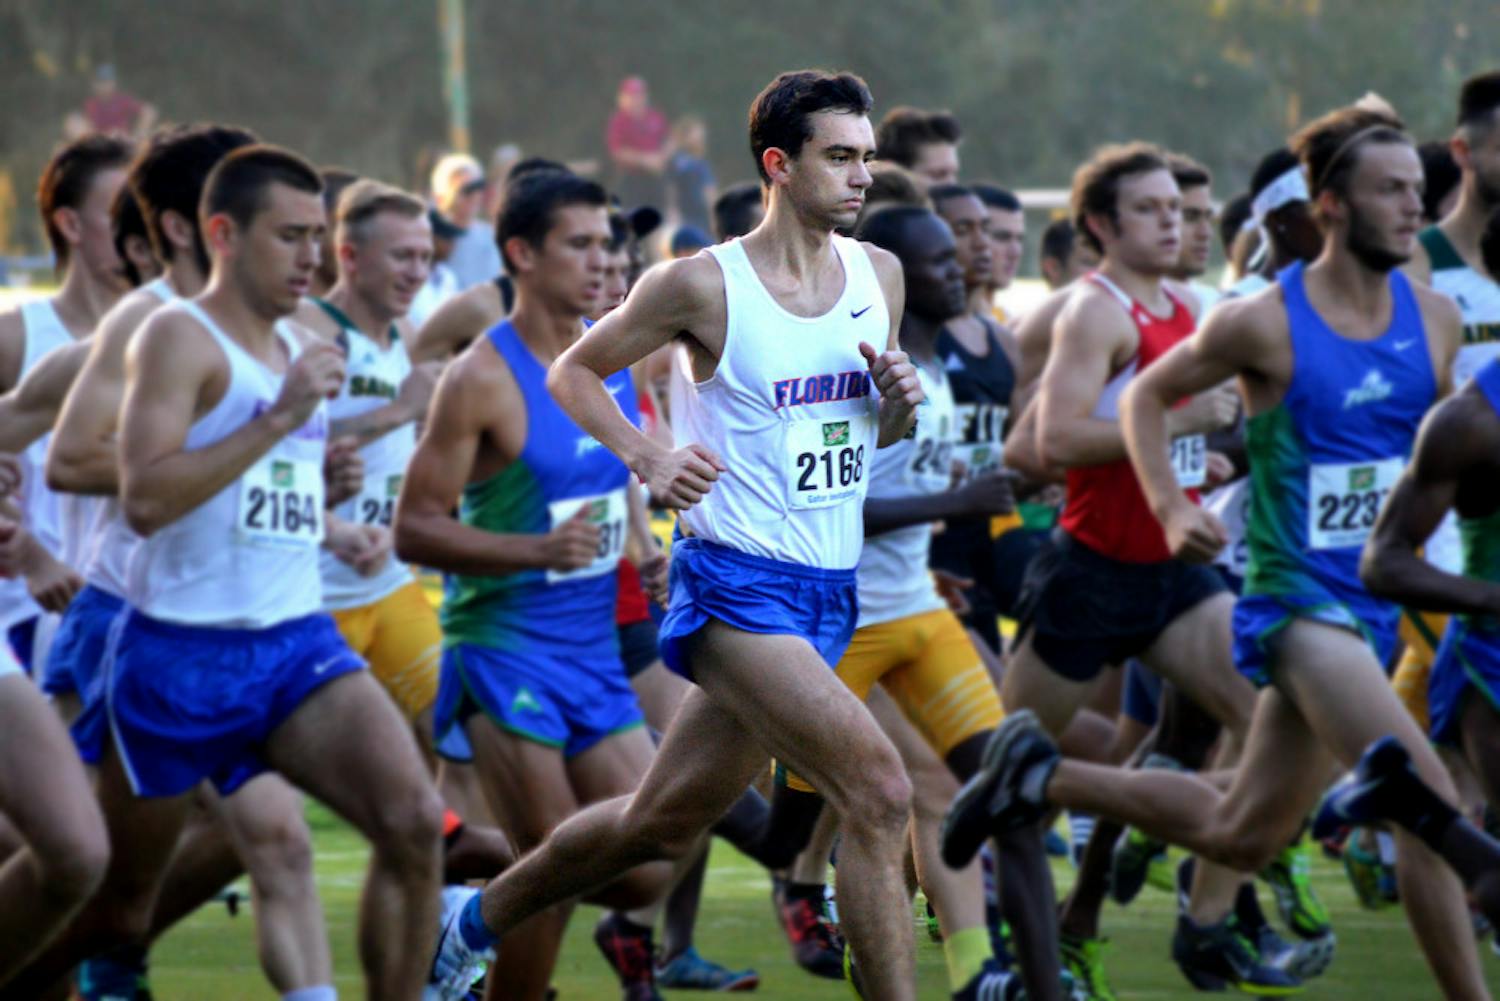 Florida’s men’s cross country team is tied for fourth with Kentucky in the 2019 SEC Cross Country Coaches’ Preseason Poll. The women’s team is ranked third.